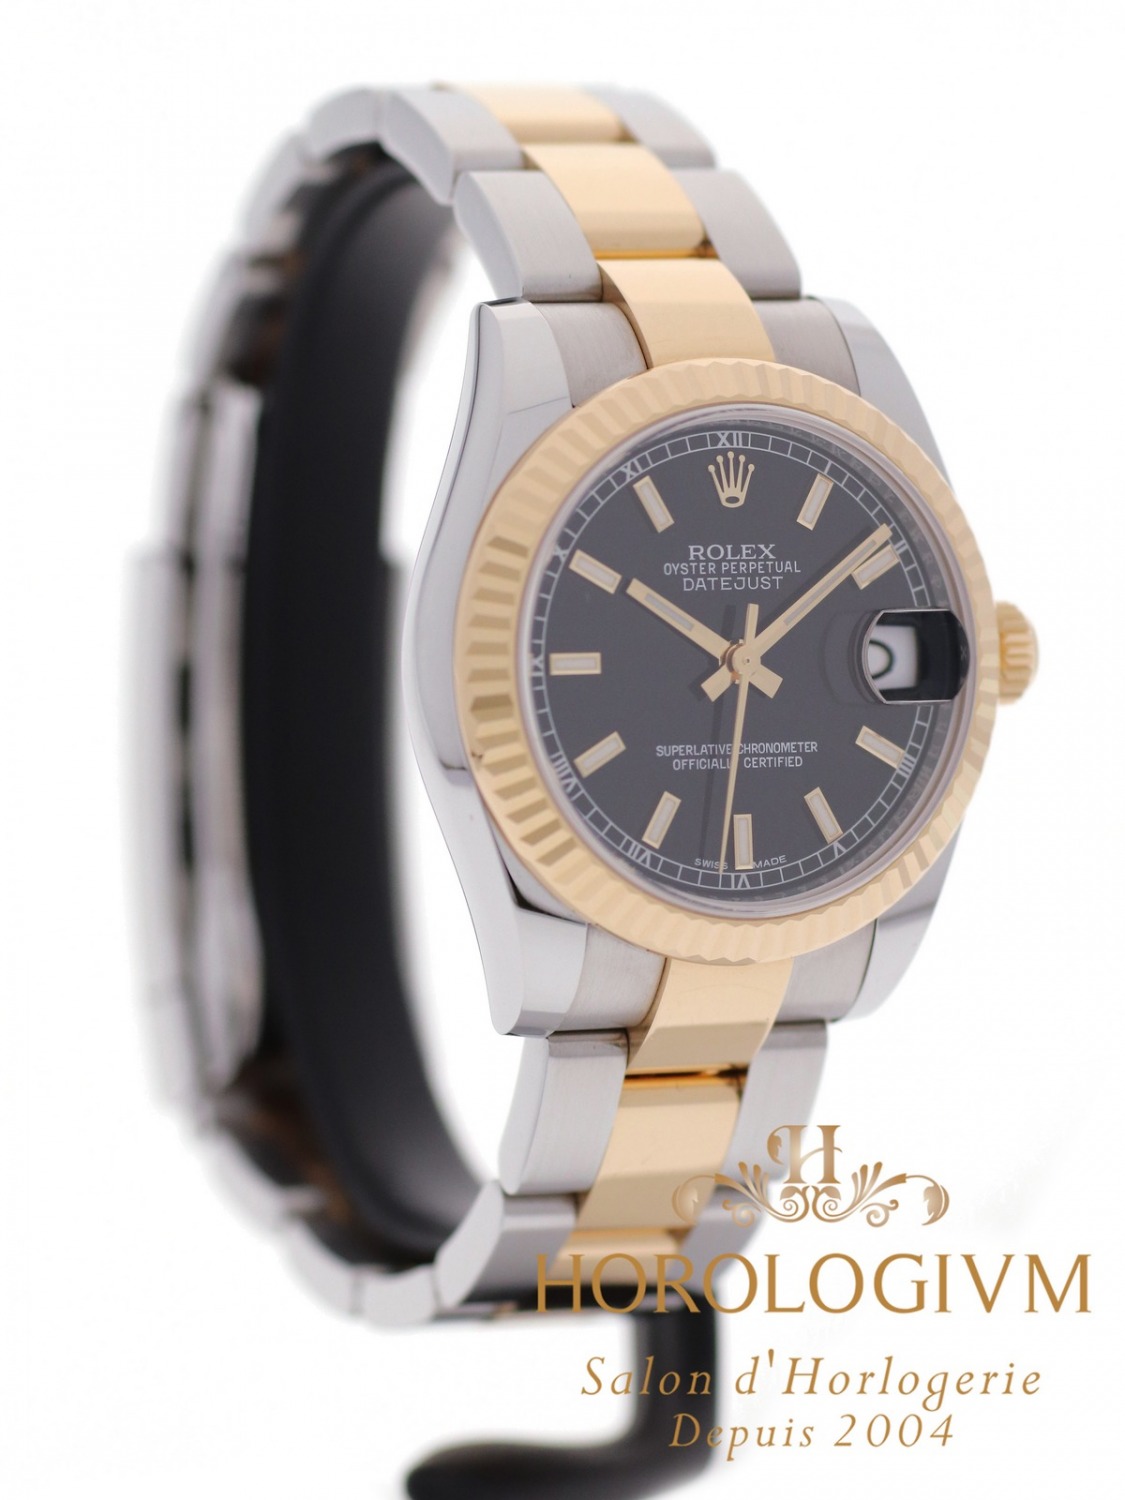 Rolex Datejust TWO-TONE 31MM Ref. 178273 watch, two-tone (bi-colored) silver and yellow gold